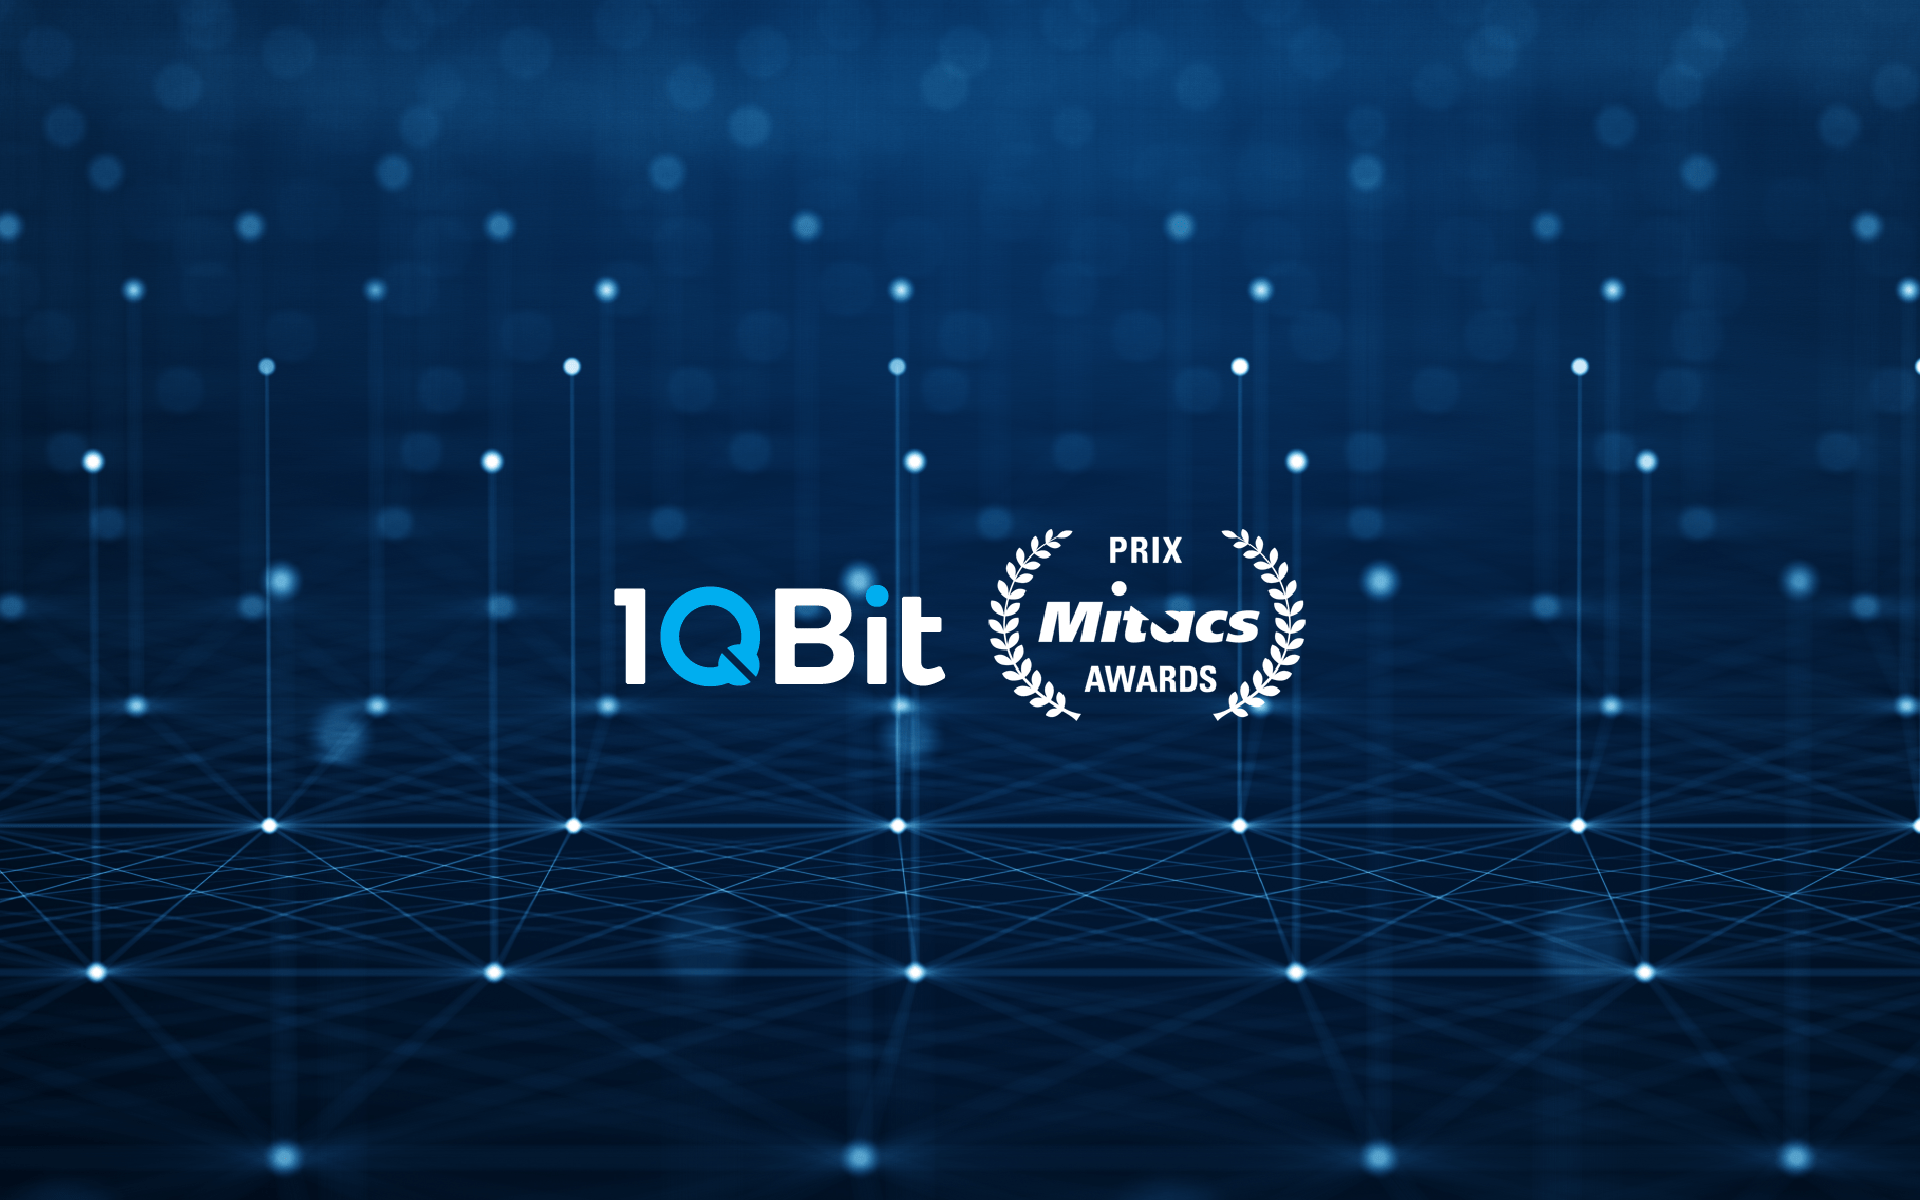 Linking Academia and Business, 1QBit Wins the Mitacs Award for Exceptional Leadership — Industry